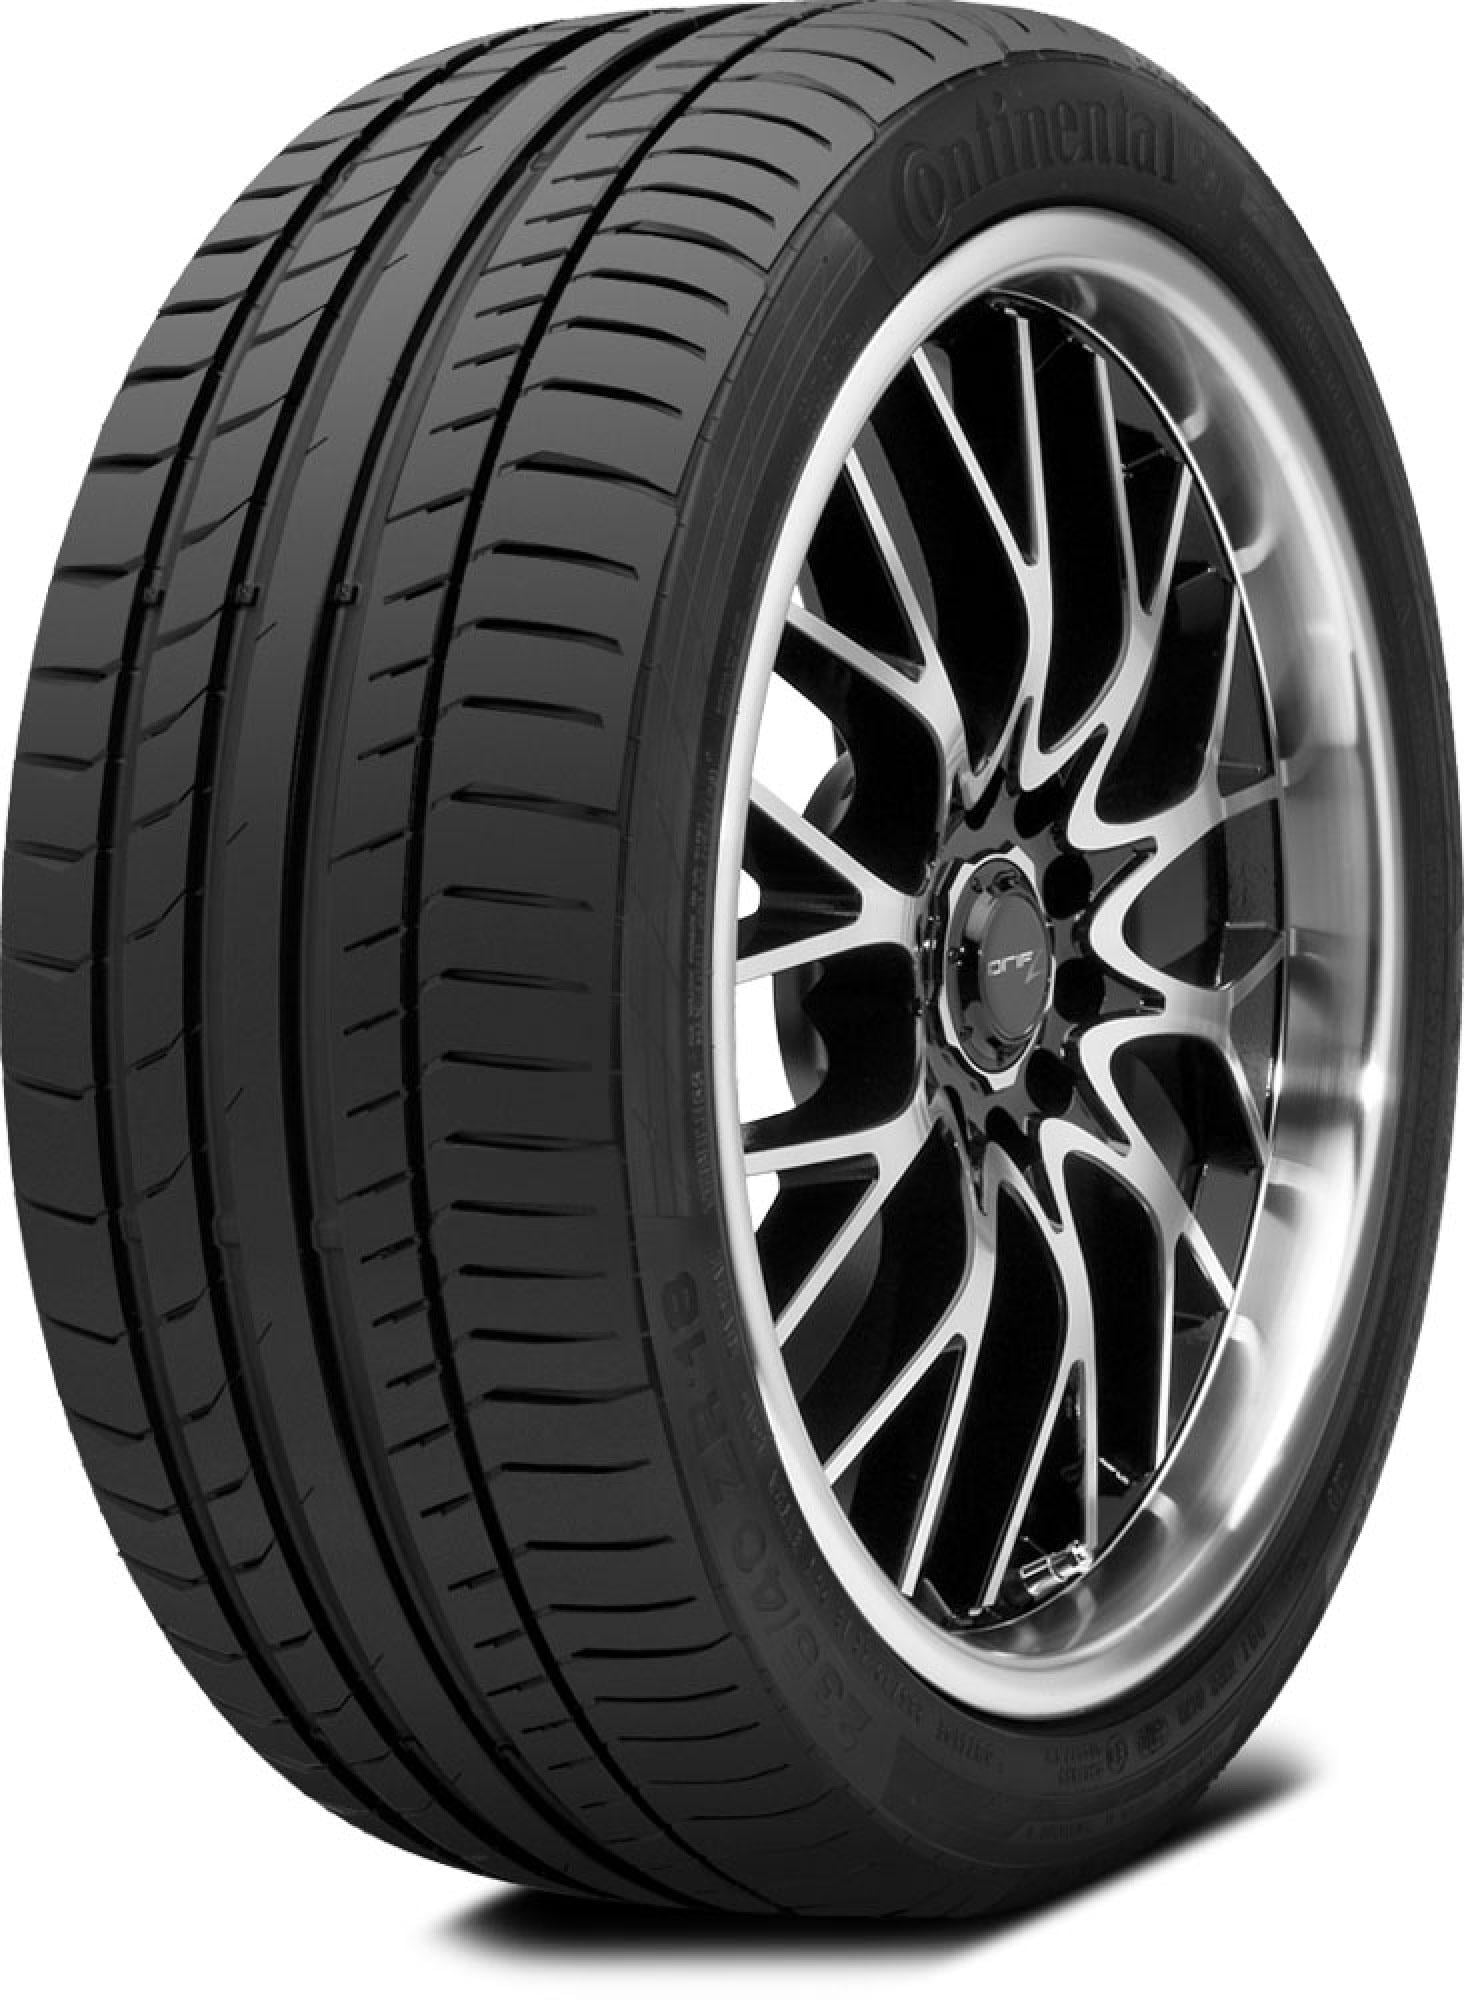 Continental ContiSportContact 92Y 225/40R18 Passenger Tire XL Summer 5